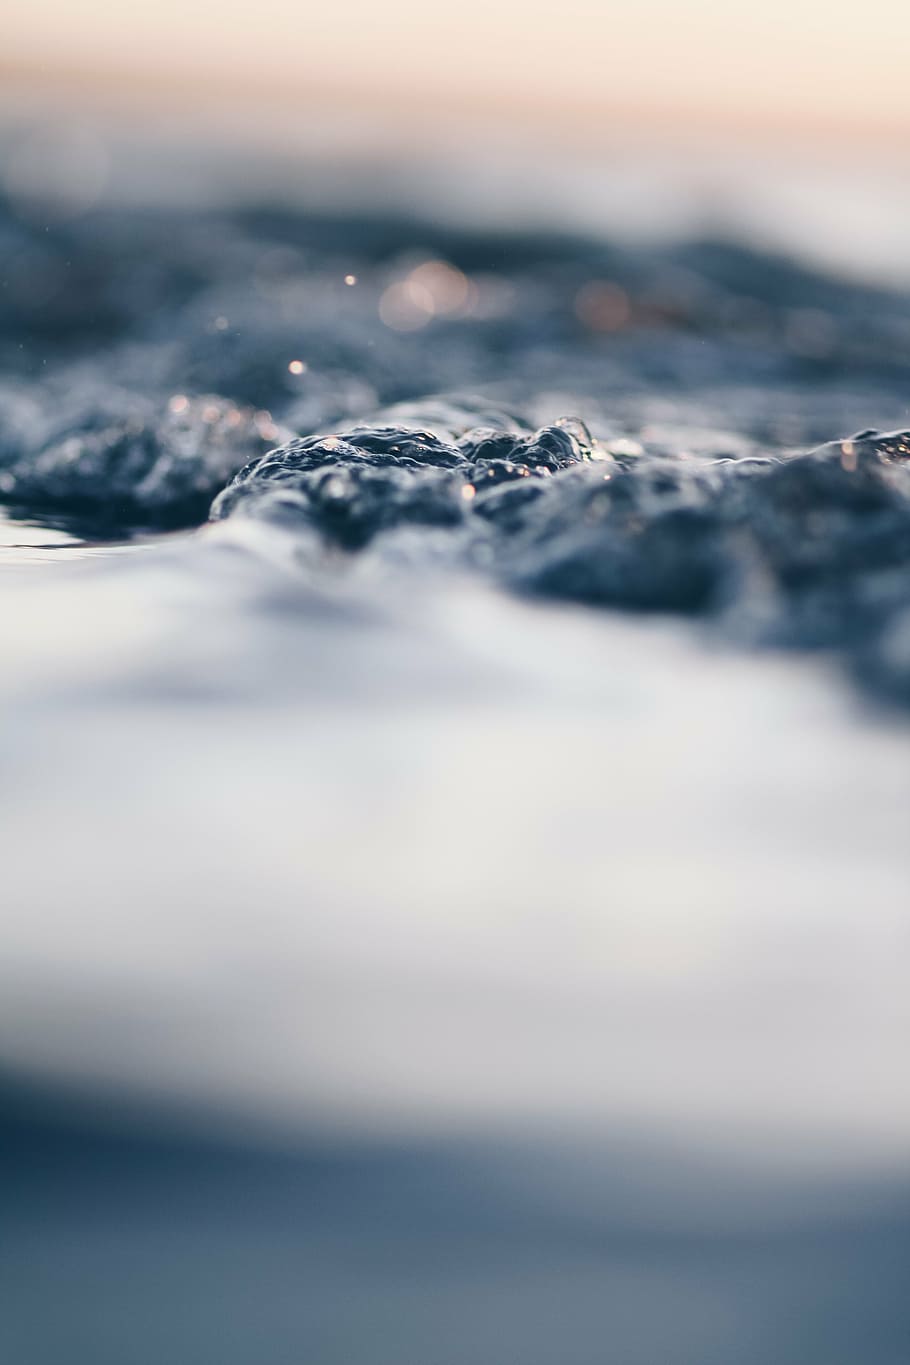 body of water, sea, ocean, water, waves, nature, blur, selective focus, tranquility, close-up